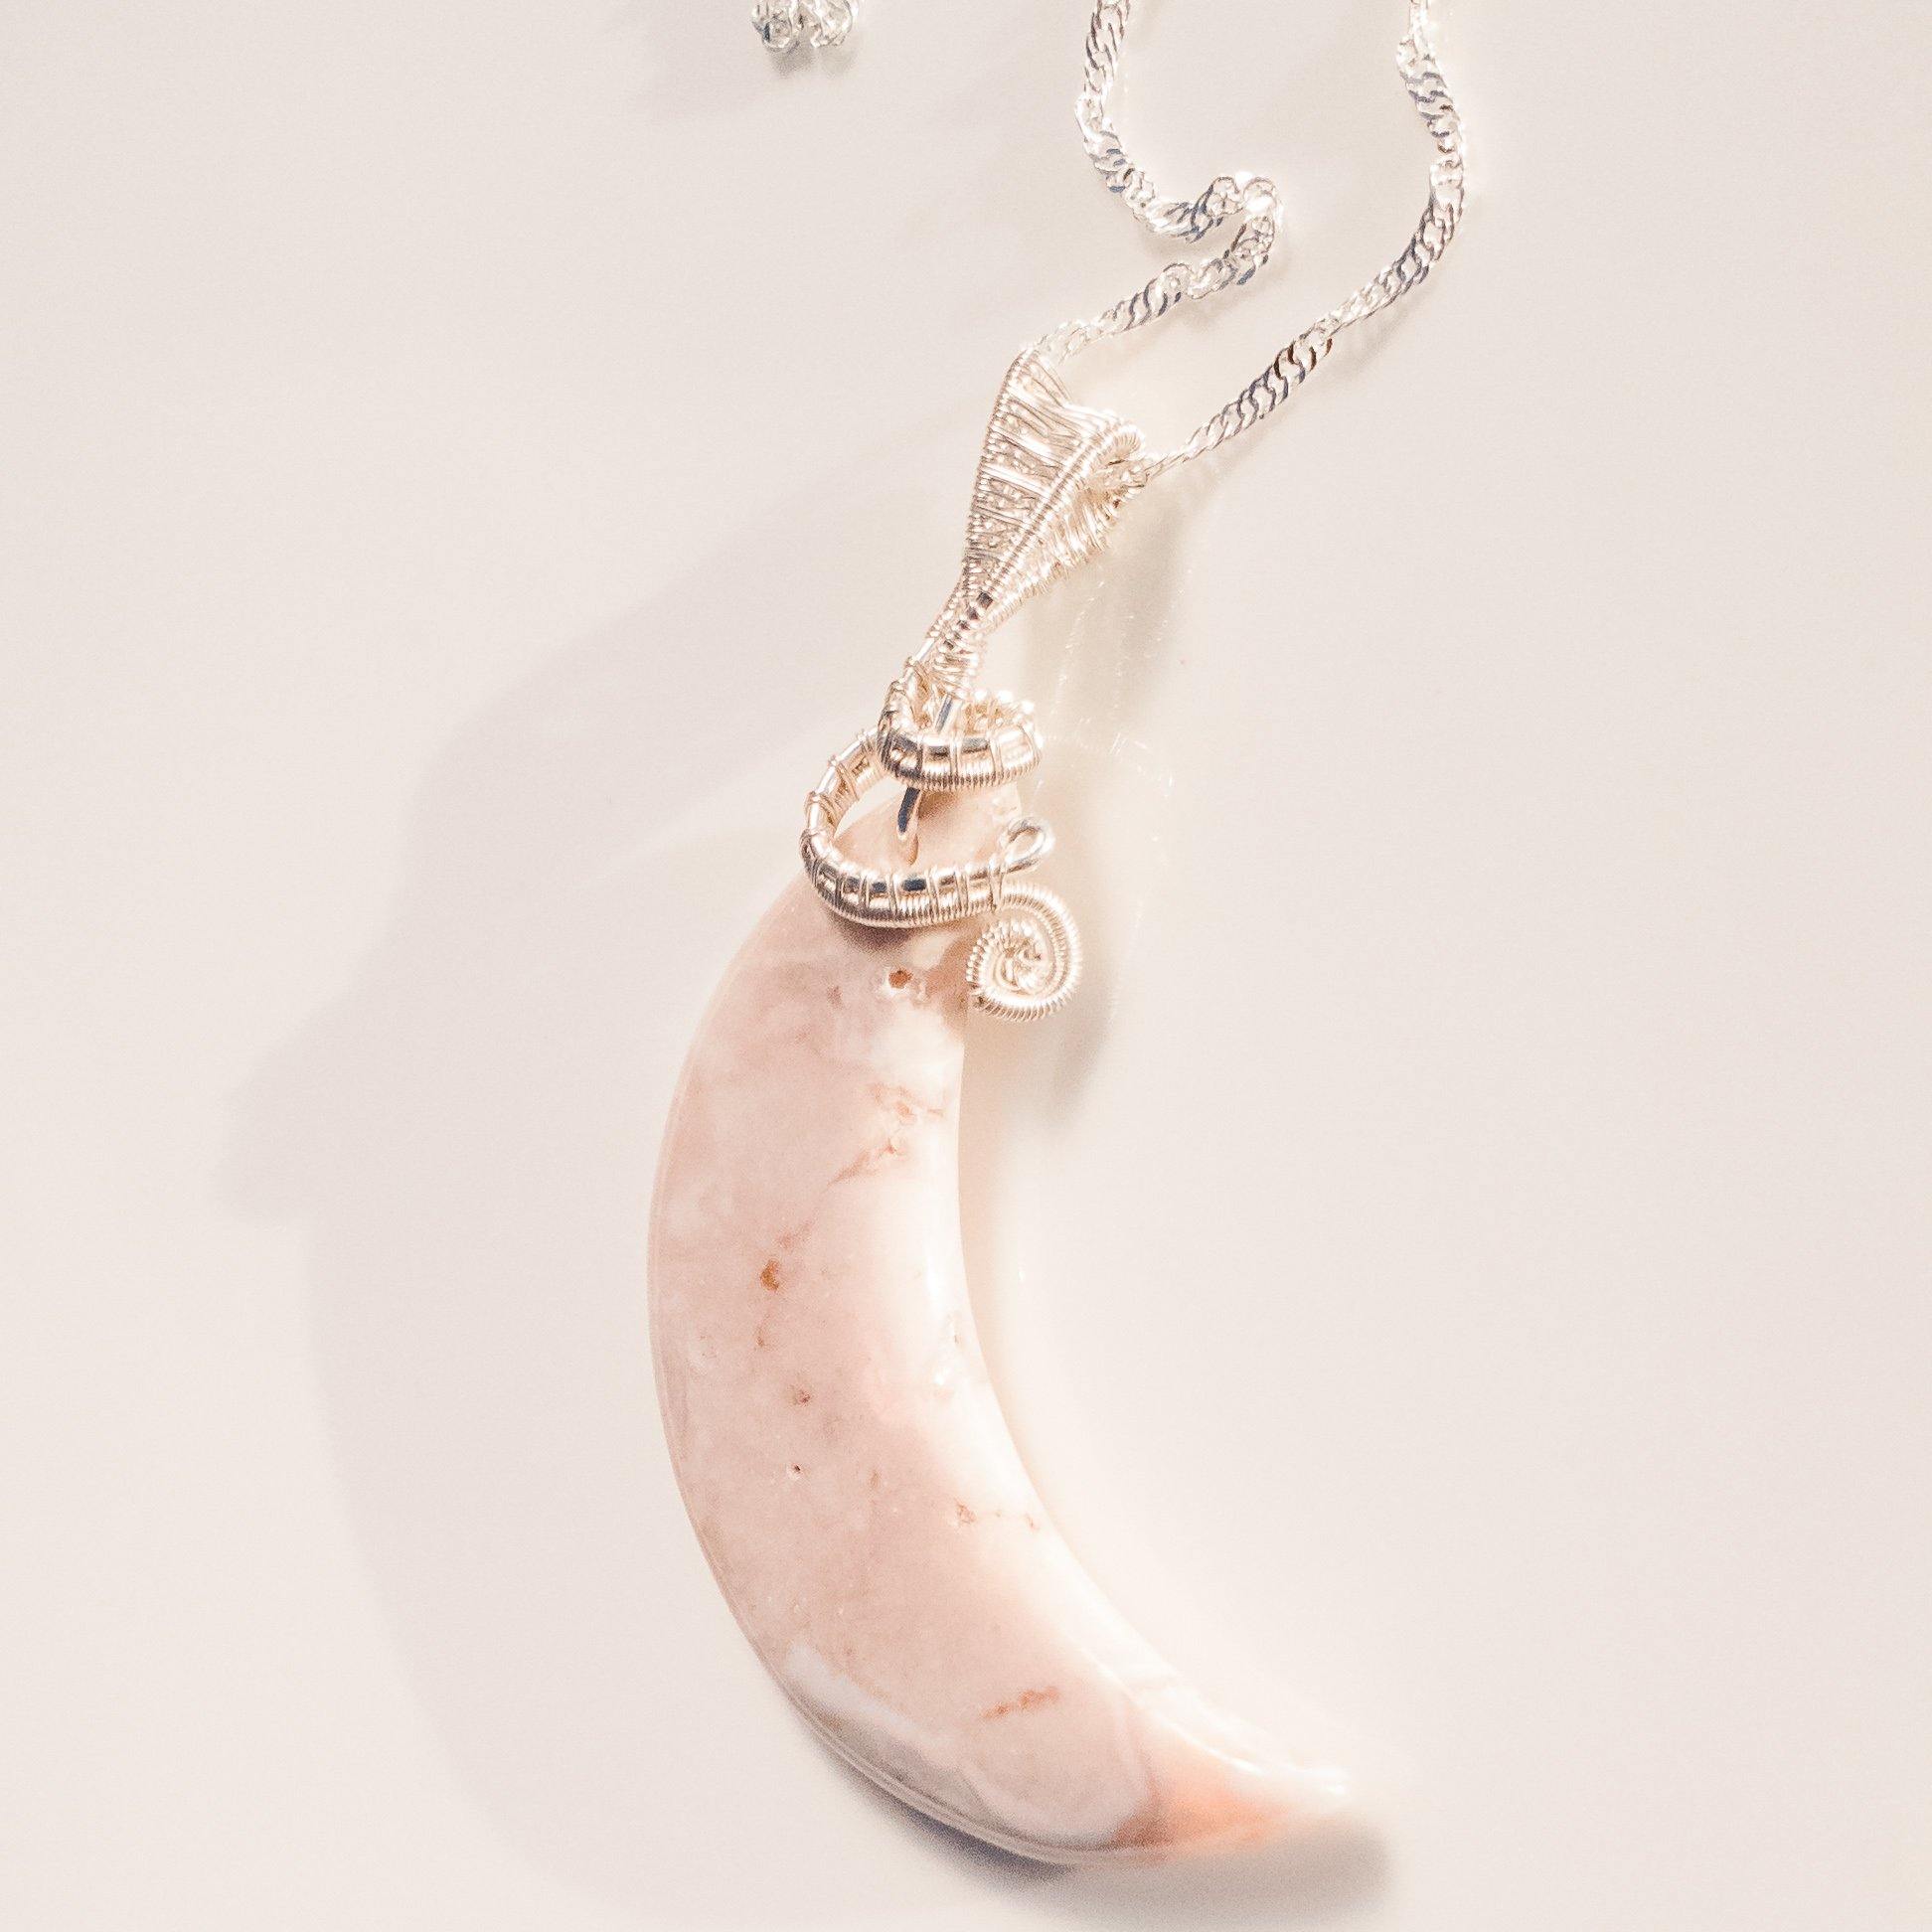 Cream colored cherry blossom crescent moon with sterling silver bail pendant - BellaChel Jeweler